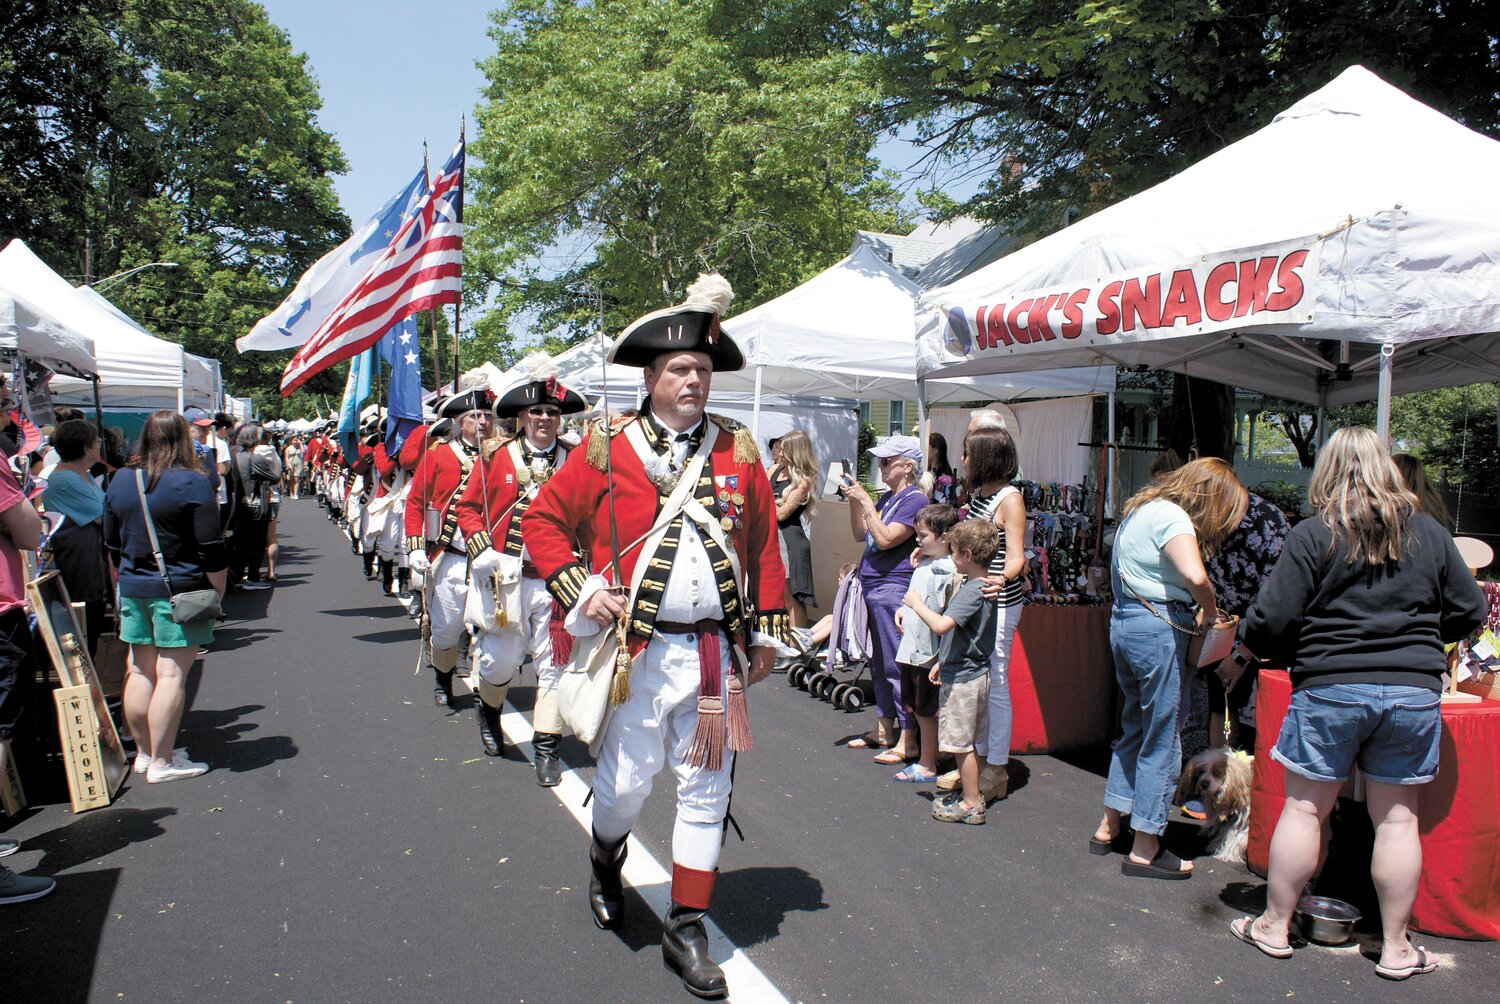 MARCHING STRONG: The Pawtuxet Rangers, one of the oldest chartered military militias in the country, march to celebrate the Gaspee Days festival. With the celebration going on all the way through June 11, those attending can still look forward to a host of wonderful attractions. June 3 will bring the Warwick Symphony Orchestra to Pawtuxet Park at 5:30 p.m. to entertain crowds with music and then fireworks will light up Salter’s Grove, Warwick, starting at 9:30 p.m. The final weekend of Gaspee takes place over Saturday June 10 and Sunday June 11. Events will include Ecumenical Services from Trinity Episcopal Church and a Gaspee Days 5K race on Saturday before the annual Gaspee Days Parade, which begins at 10 a.m. and travels the length of Narragansett Parkway in Warwick. Sunday will bring the Blessing of the Fleet at Rhode Island Yacht Club  at 11 a.m., several events in Pawtuxet park, such as Sunday in the Park with live music and food at noon, a raffle drawing at 3 p.m. and the traditional Burning of the Gaspee at 4 p.m.  More photos on page 7. (Photo by Steve Popiel)